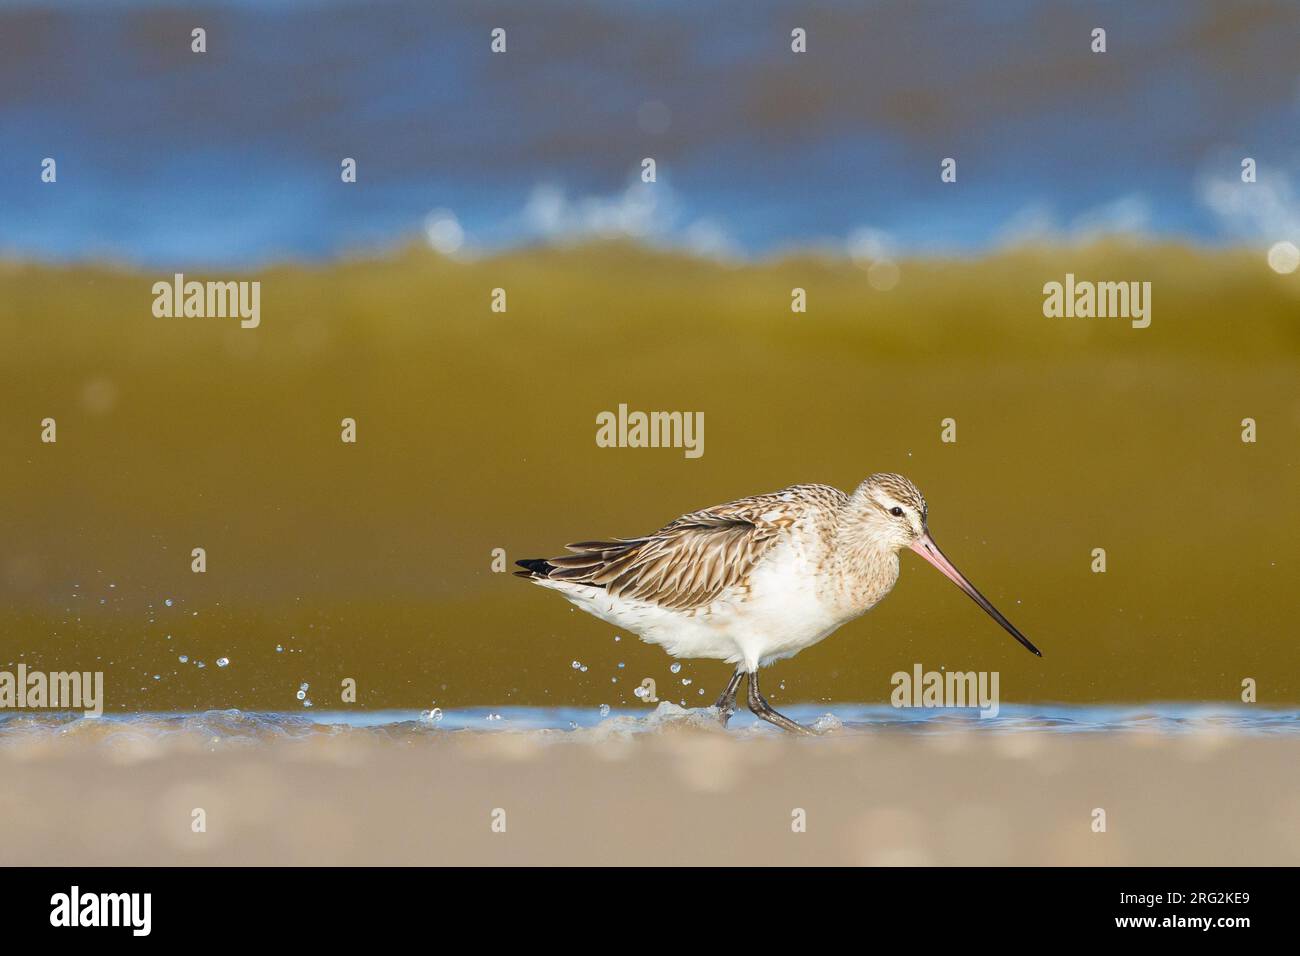 Spring Bar-tailed Godwit (Limosa lapponica) foraging on the beach of Katwijk, Netherlands. With wave crushing at the shore in the background. Stock Photo